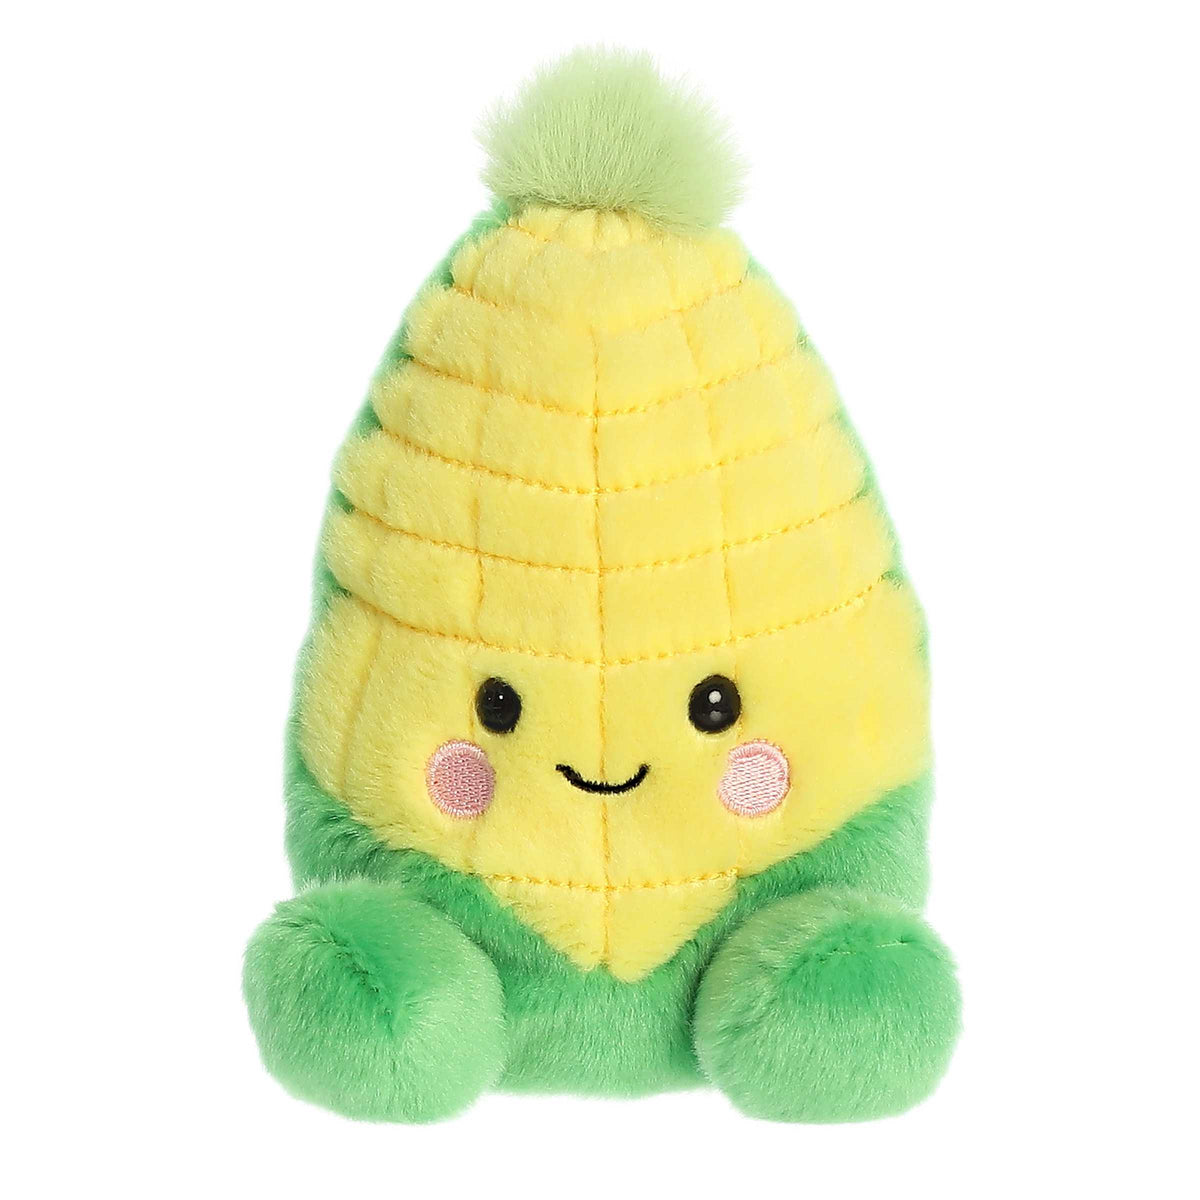 Cuddly mini corn shaped plush toy with bright yellow and green fur body, light green tassel and textured design at the front.